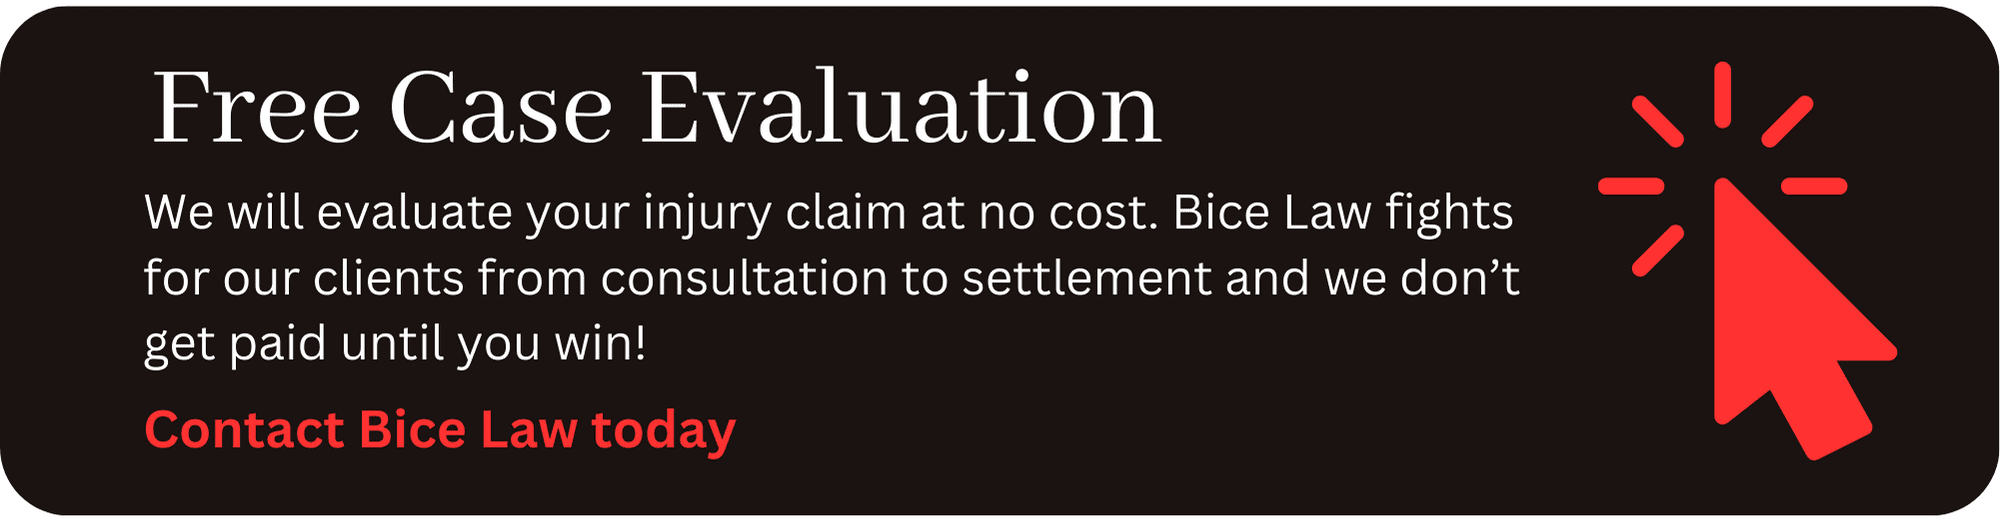 Free Caase Evaluation Button - Truck Accident Injury Case